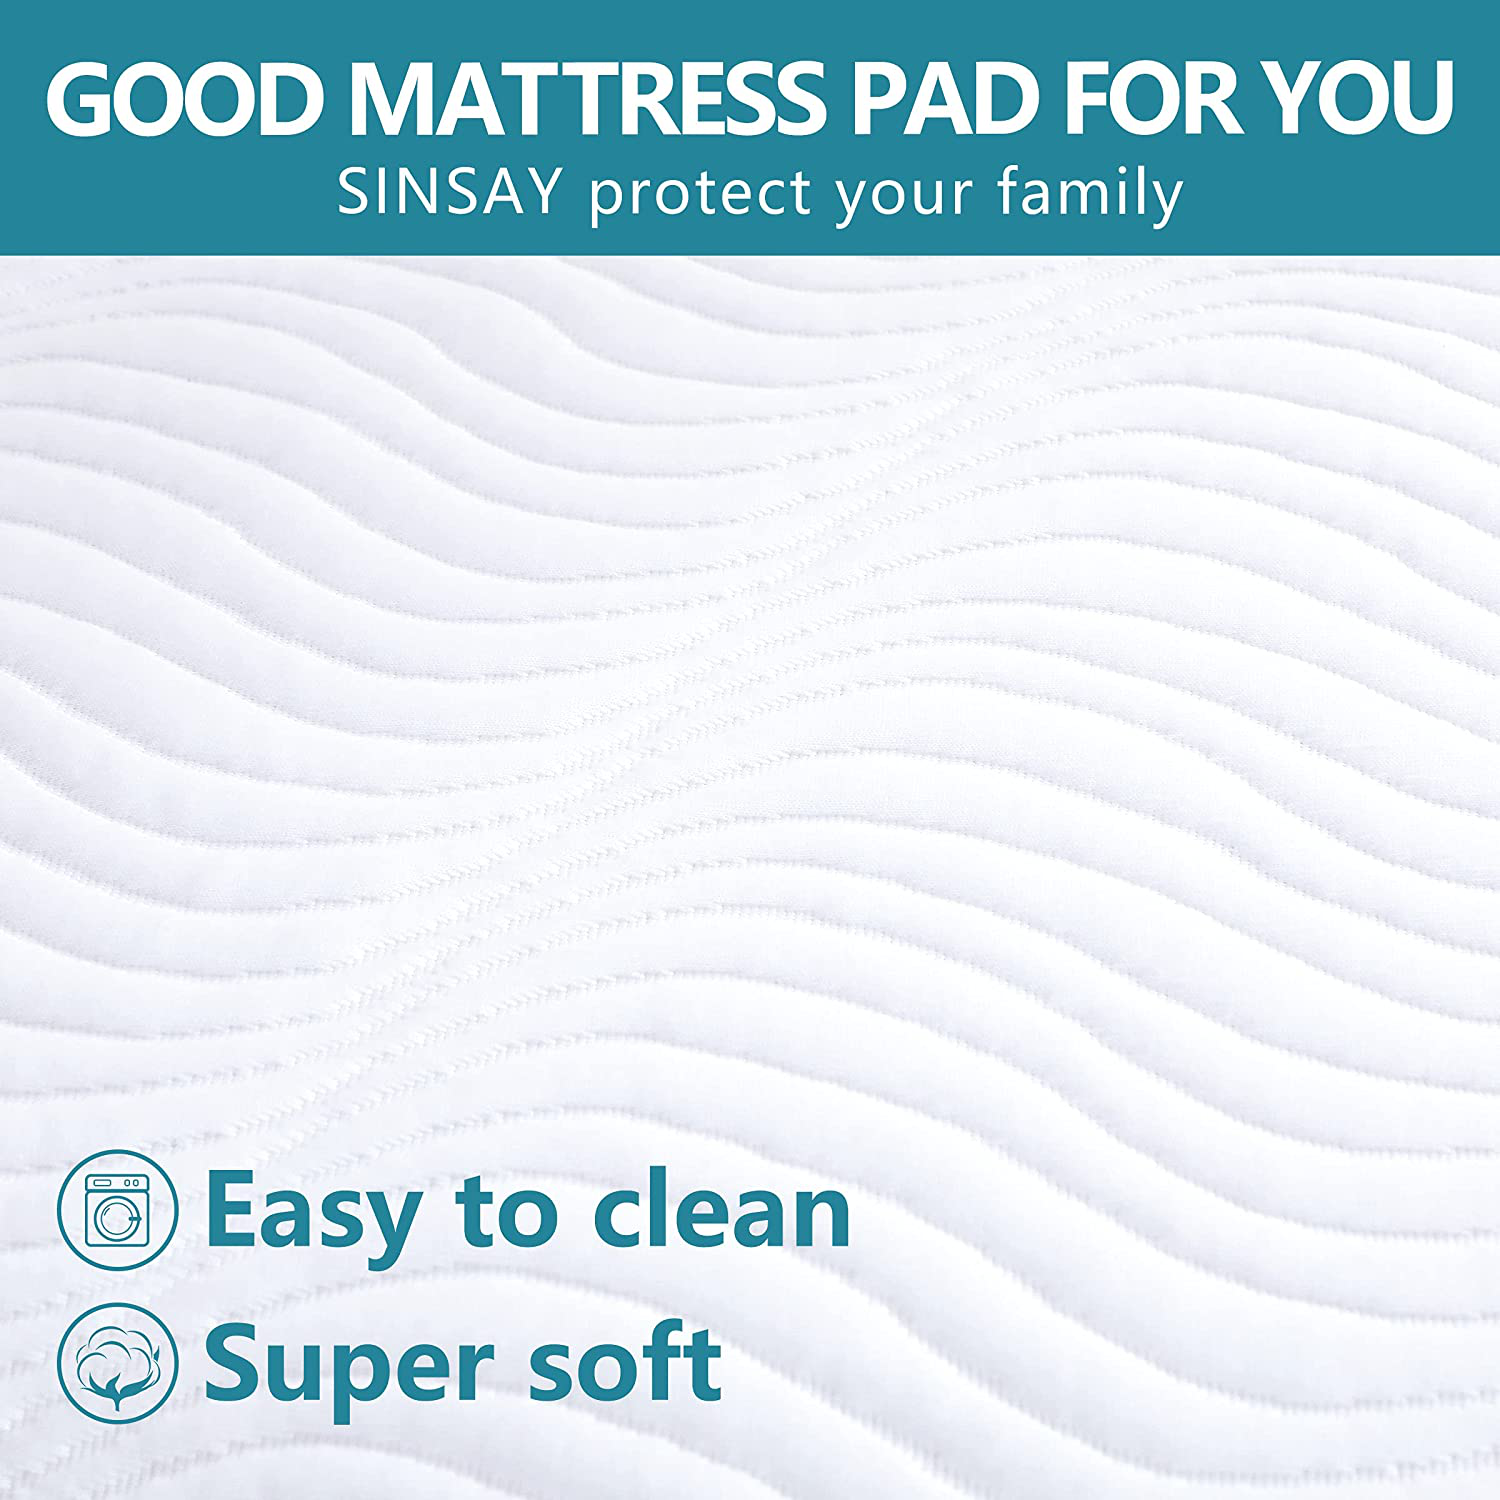 SINSAY Twin XL Size Waterproof Mattress Protector, Breathable Ultra-Soft & Noiseless Protector Cover, Stretchable Deep Pocket Fits Up to 21" Mattress Pad, Easy to Clean Machine-Wash Mattress Cover